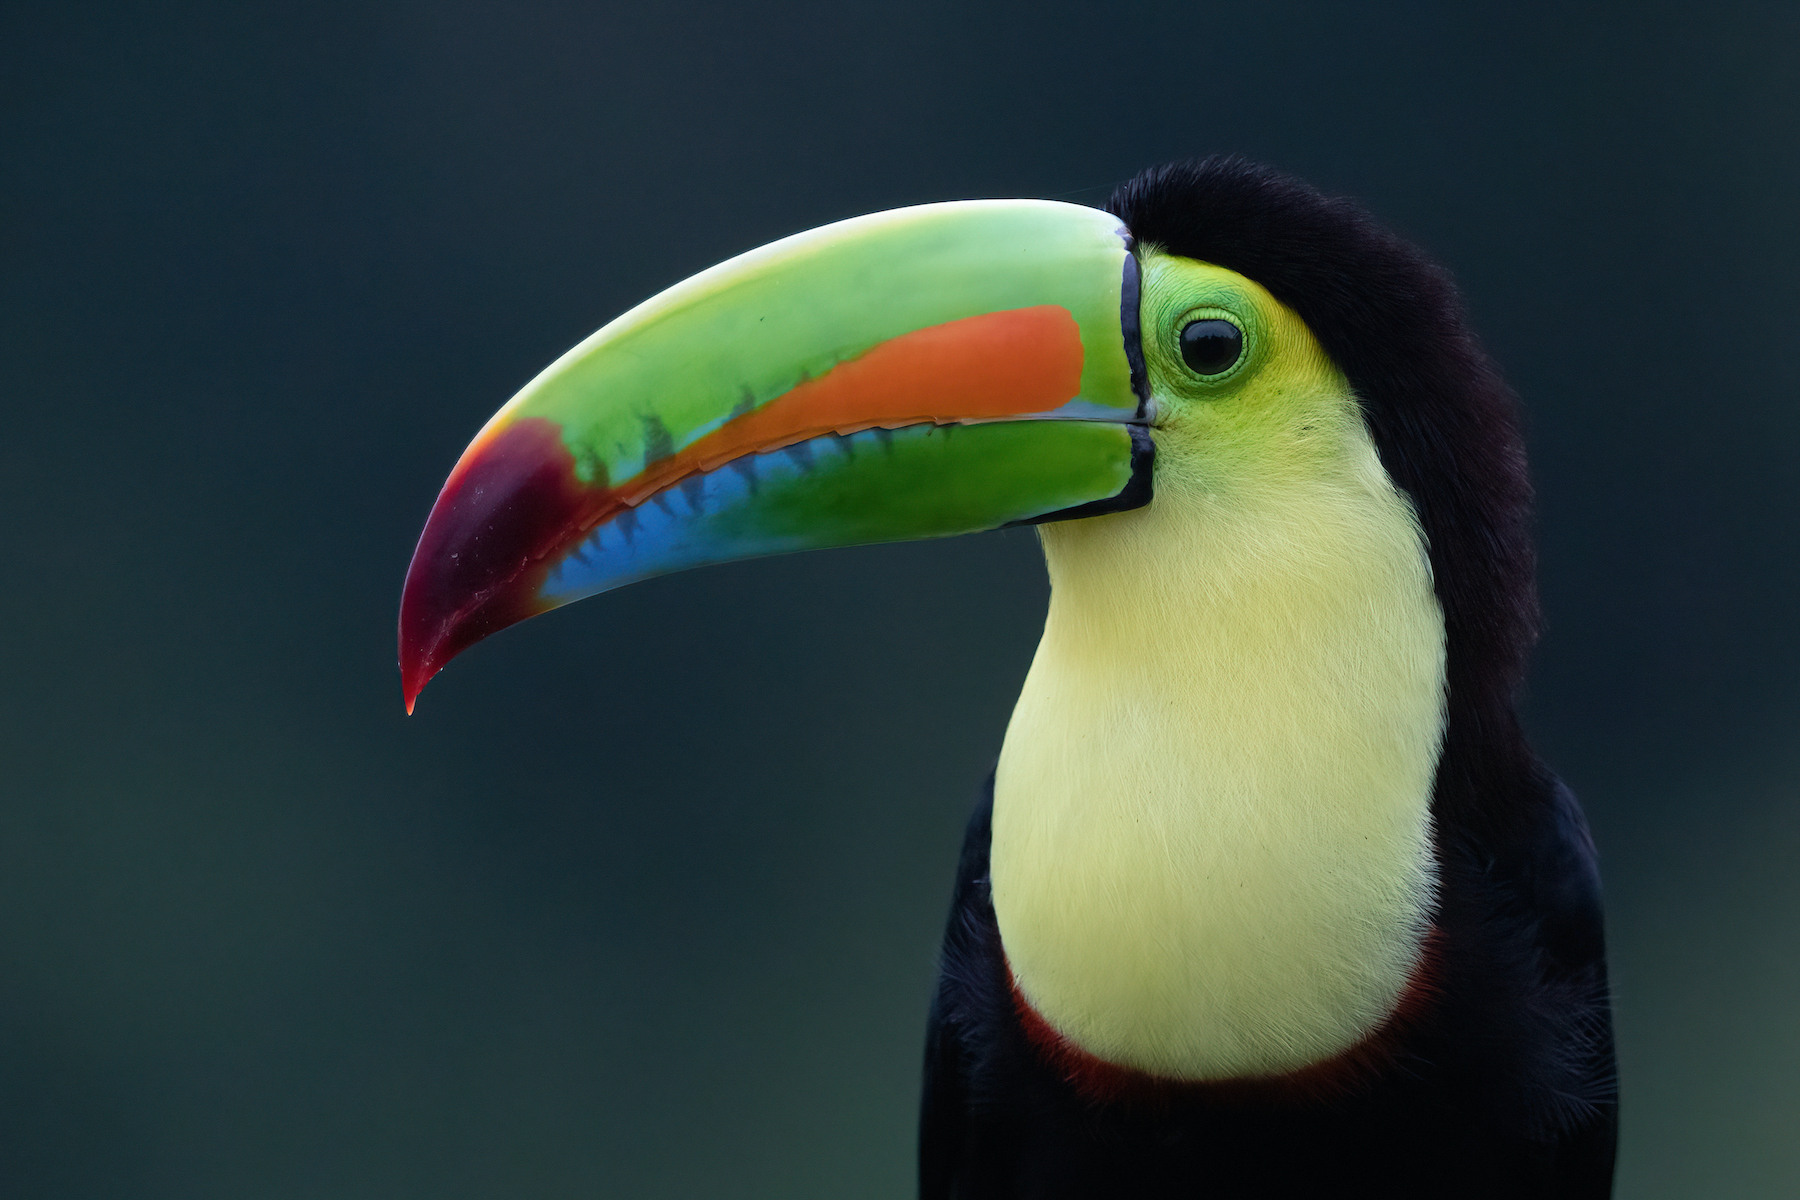 Look at that bill! Portrait of a Keel-billed Toucan